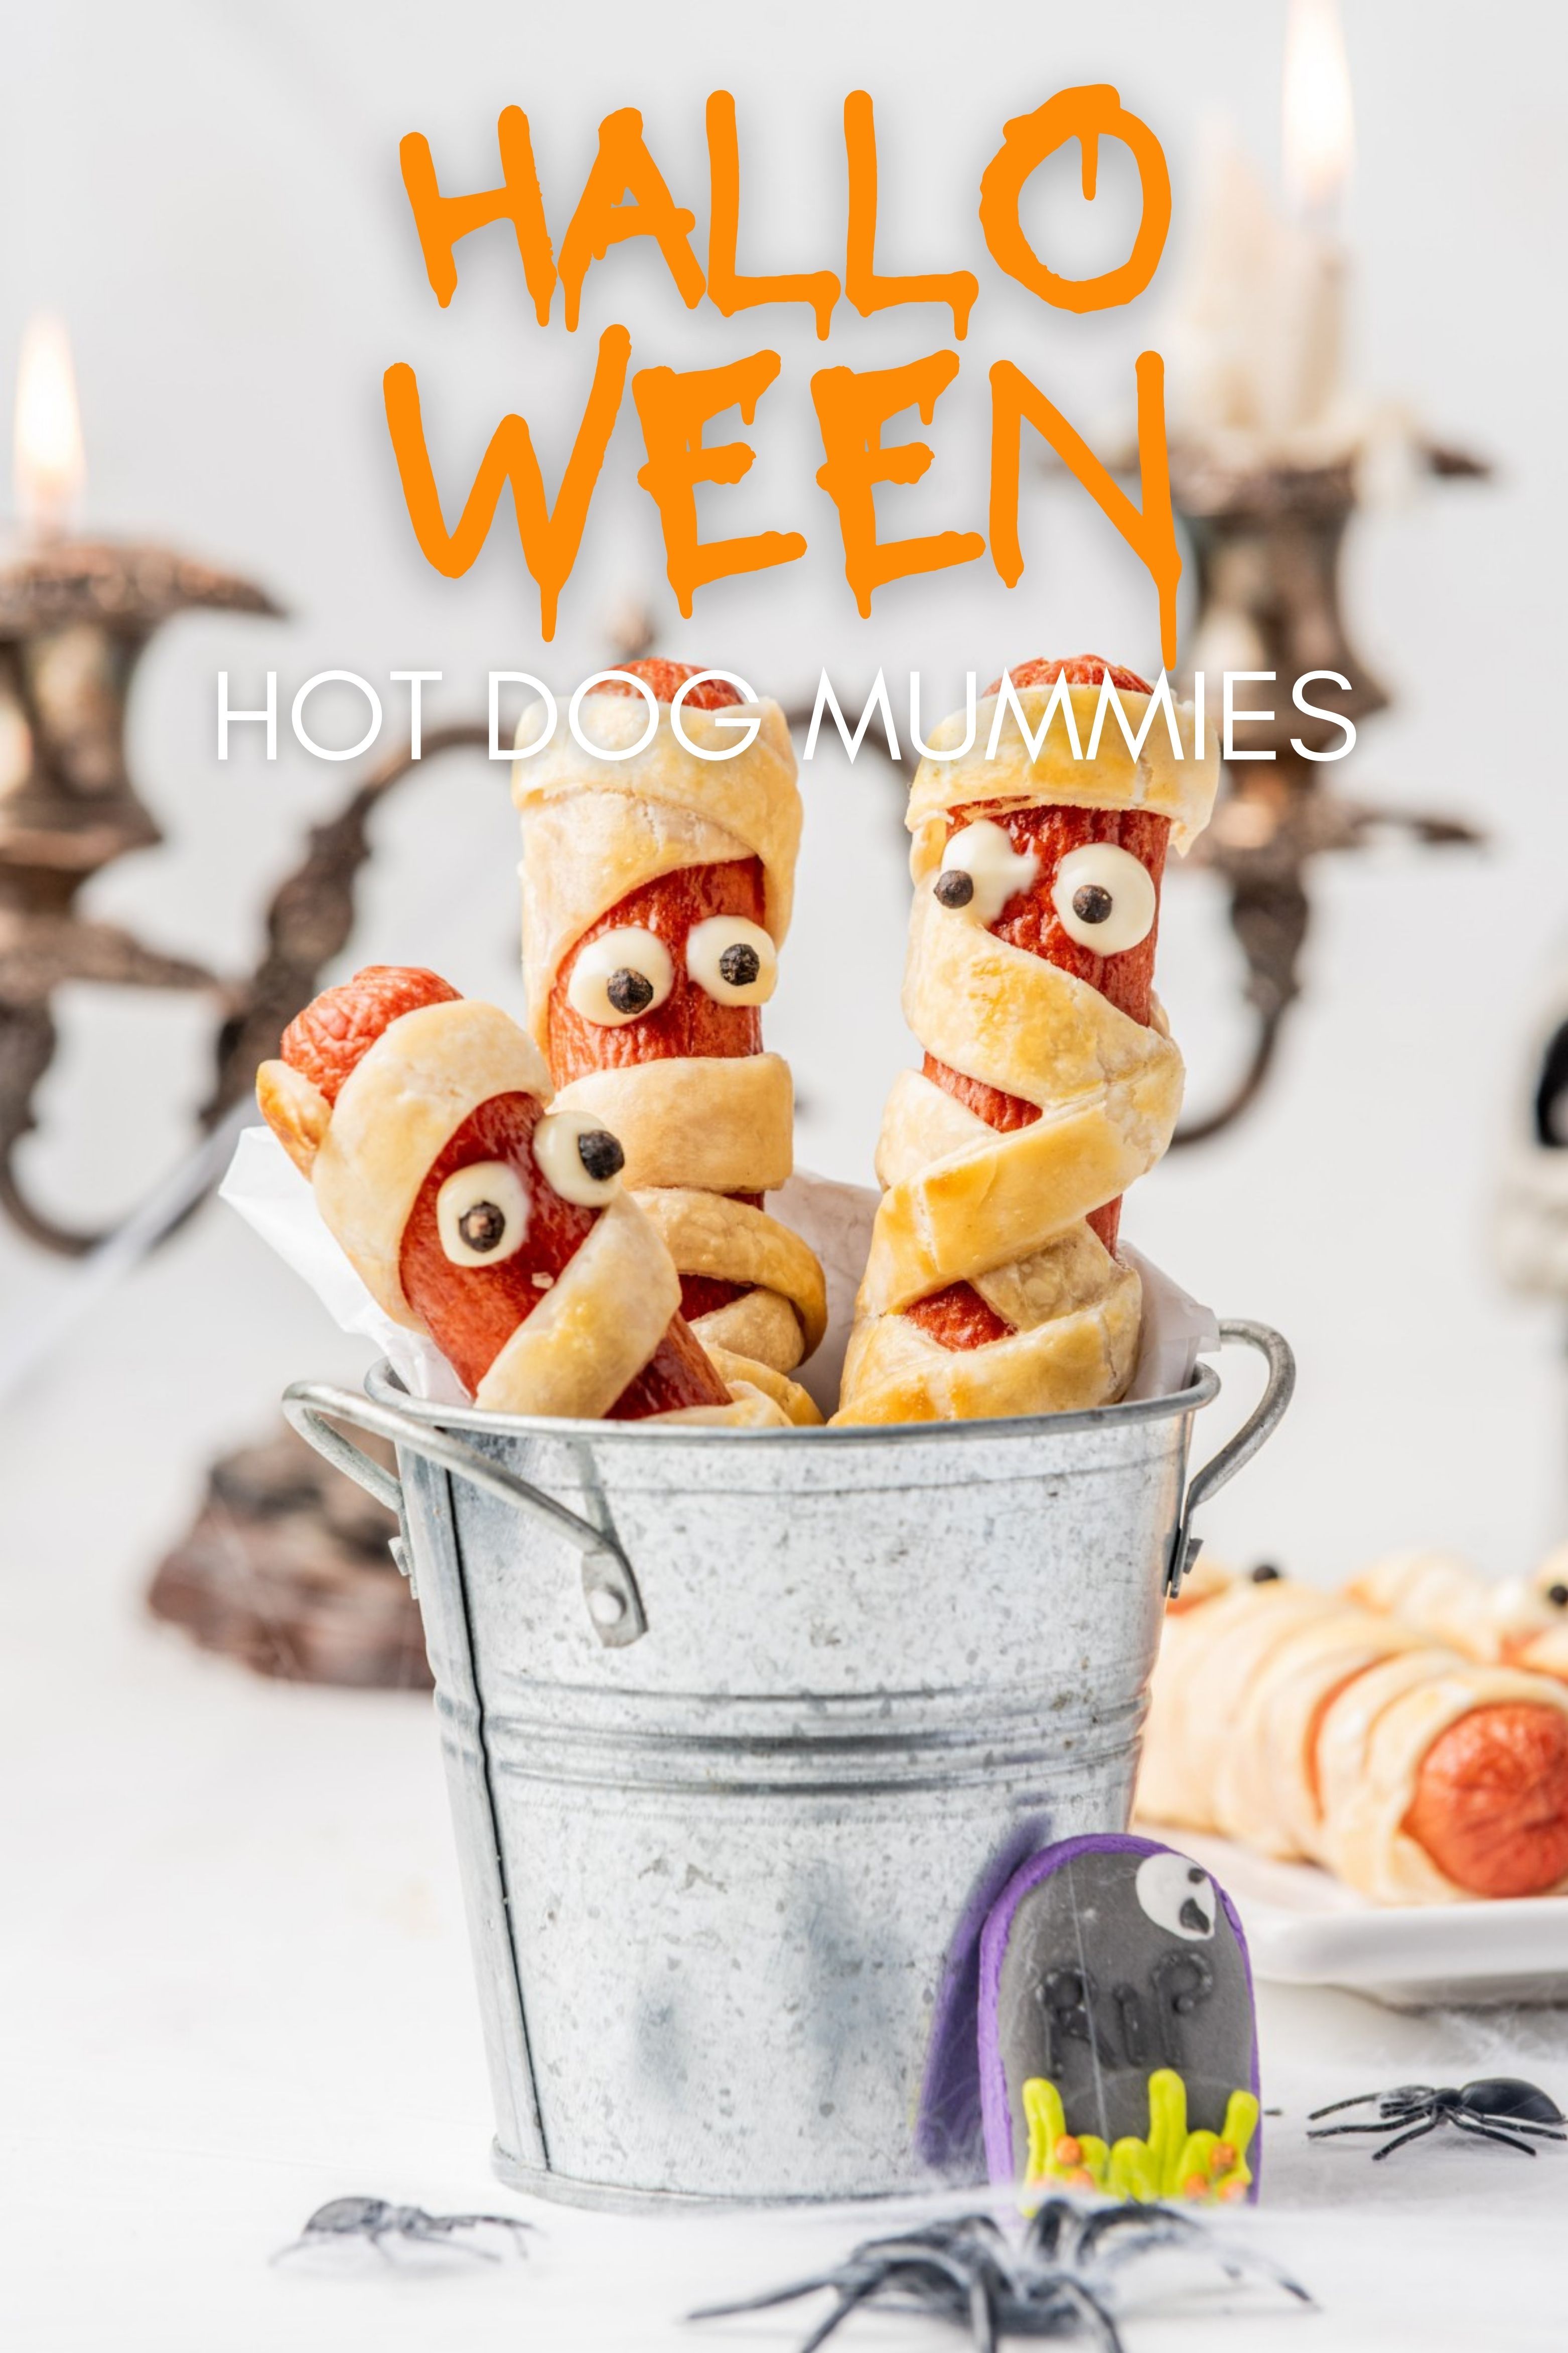 Crunchy and Delicious: Keto Mummy Dogs with Pork Rinds